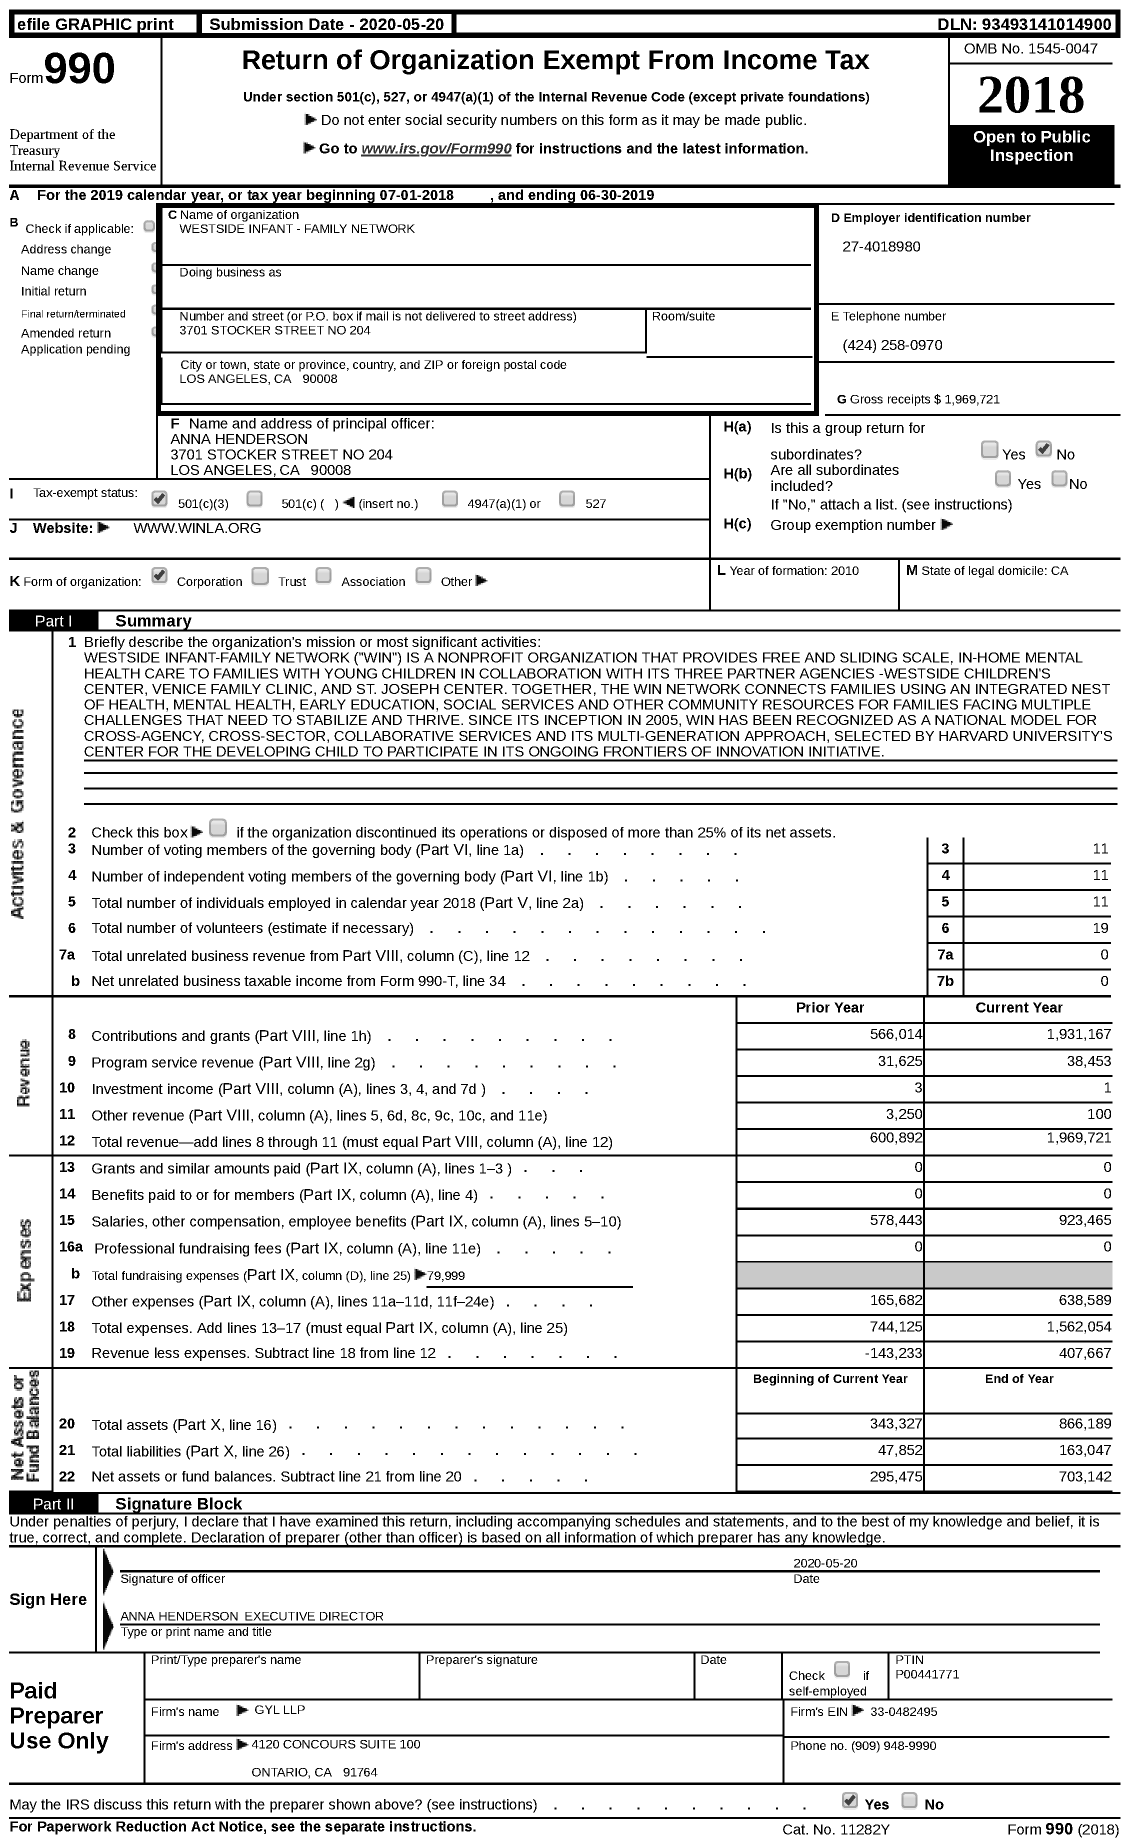 Image of first page of 2018 Form 990 for Westside Infant-Family Network